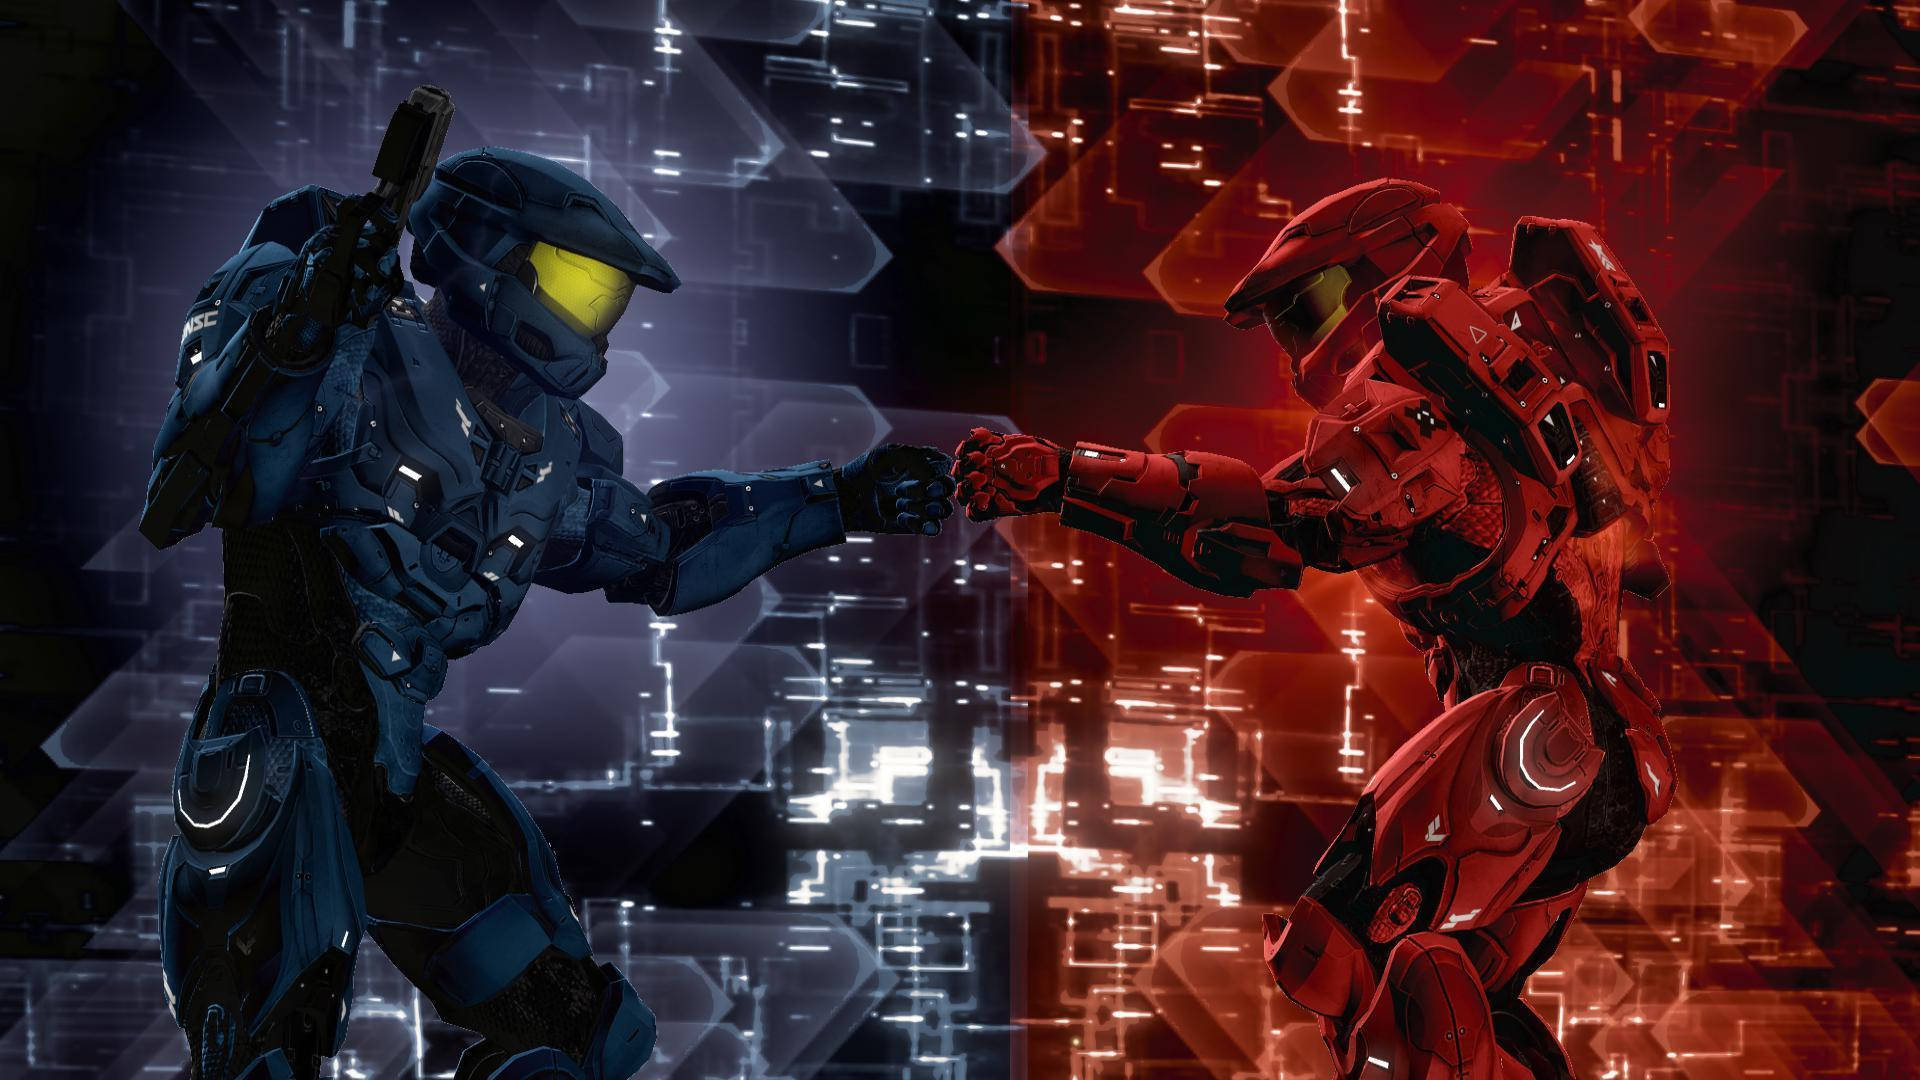 Leaders From Red Vs Blue Background